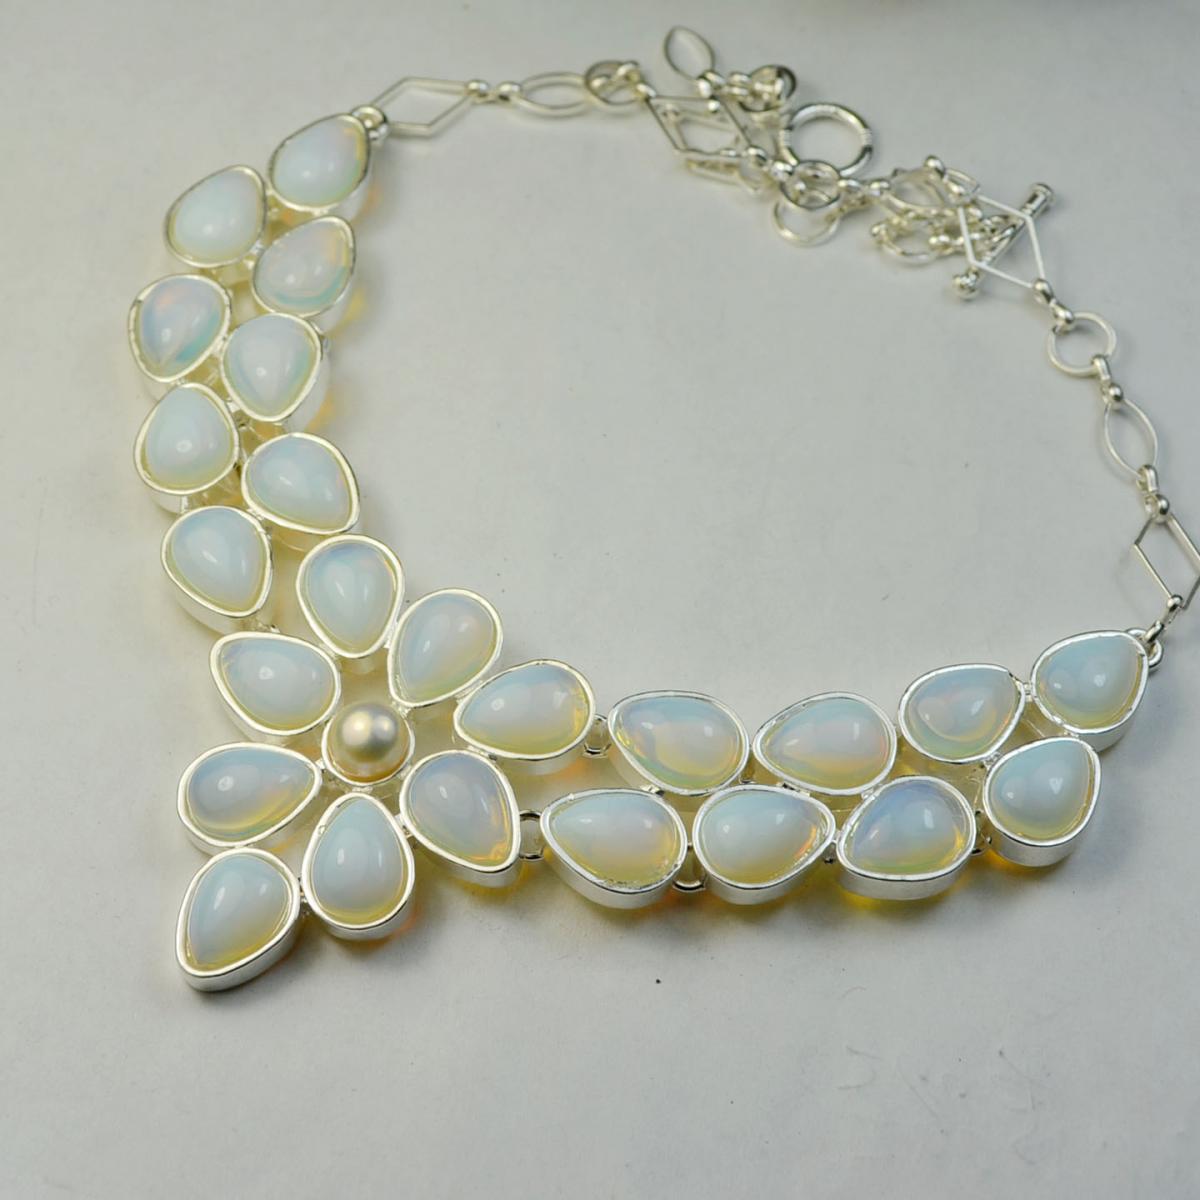 Huge Rainbow Moonstone Necklace 19 3/4", 112 Grams Necklace Handmade Chain Link Necklace